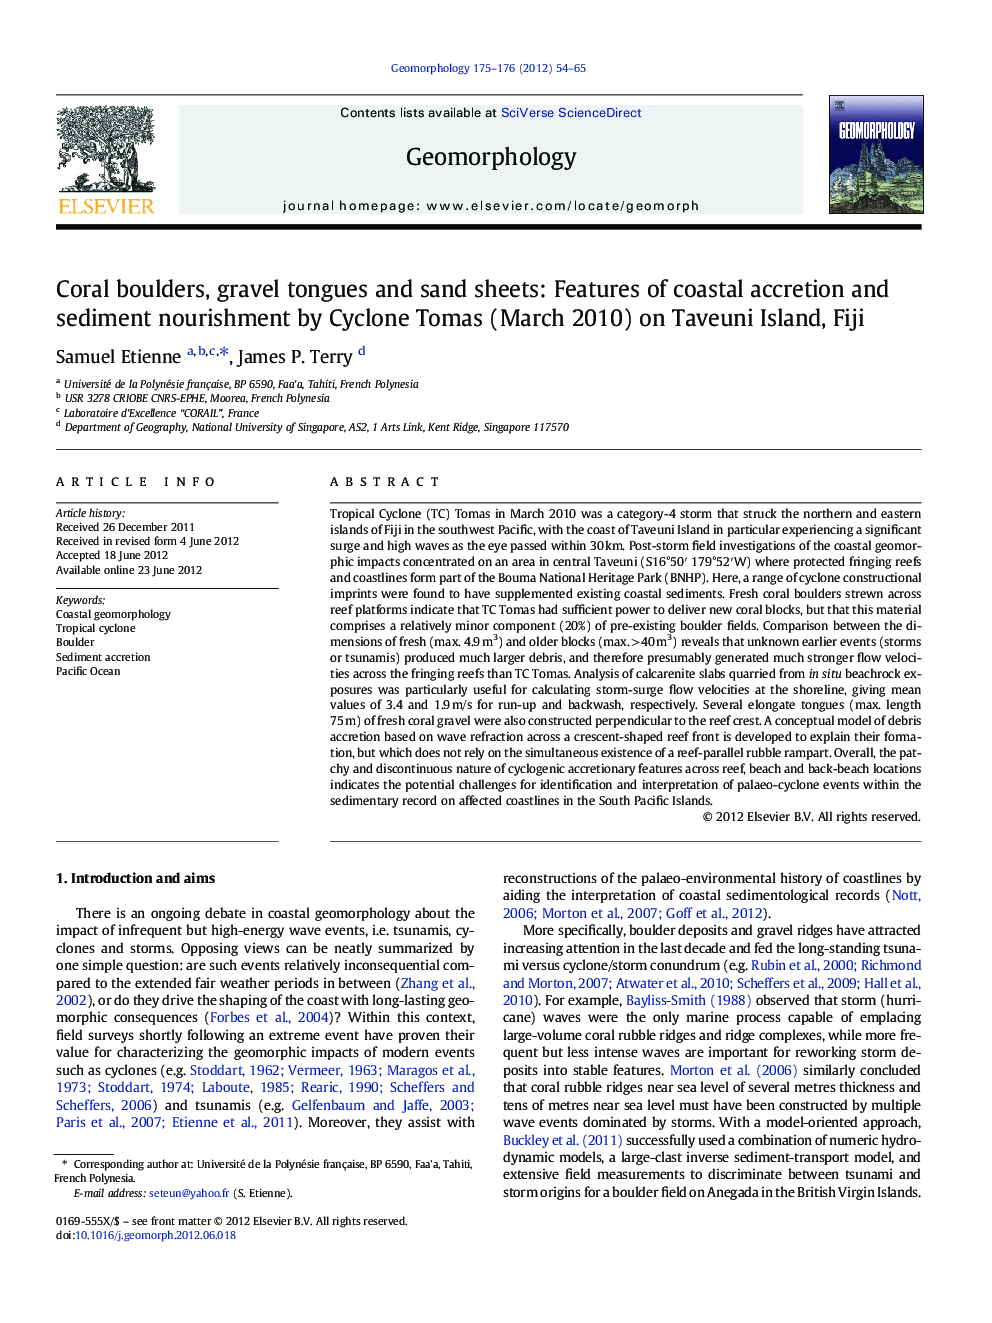 Coral boulders, gravel tongues and sand sheets: Features of coastal accretion and sediment nourishment by Cyclone Tomas (March 2010) on Taveuni Island, Fiji